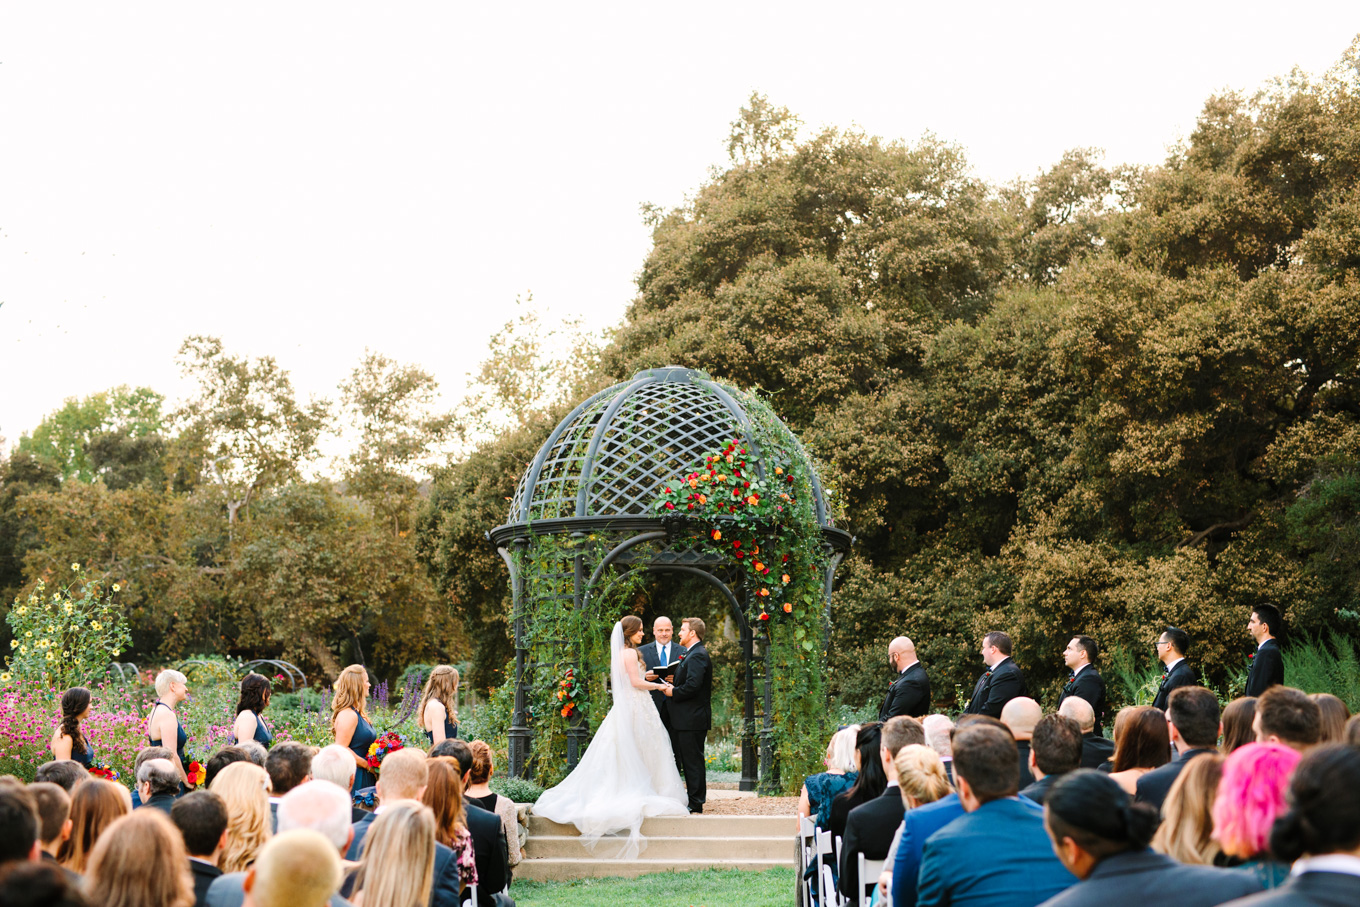 Wedding ceremony at Descanso Gardens | Best Southern California Garden Wedding Venues | Colorful and elevated wedding photography for fun-loving couples | #gardenvenue #weddingvenue #socalweddingvenue #bouquetideas #uniquebouquet   Source: Mary Costa Photography | Los Angeles 